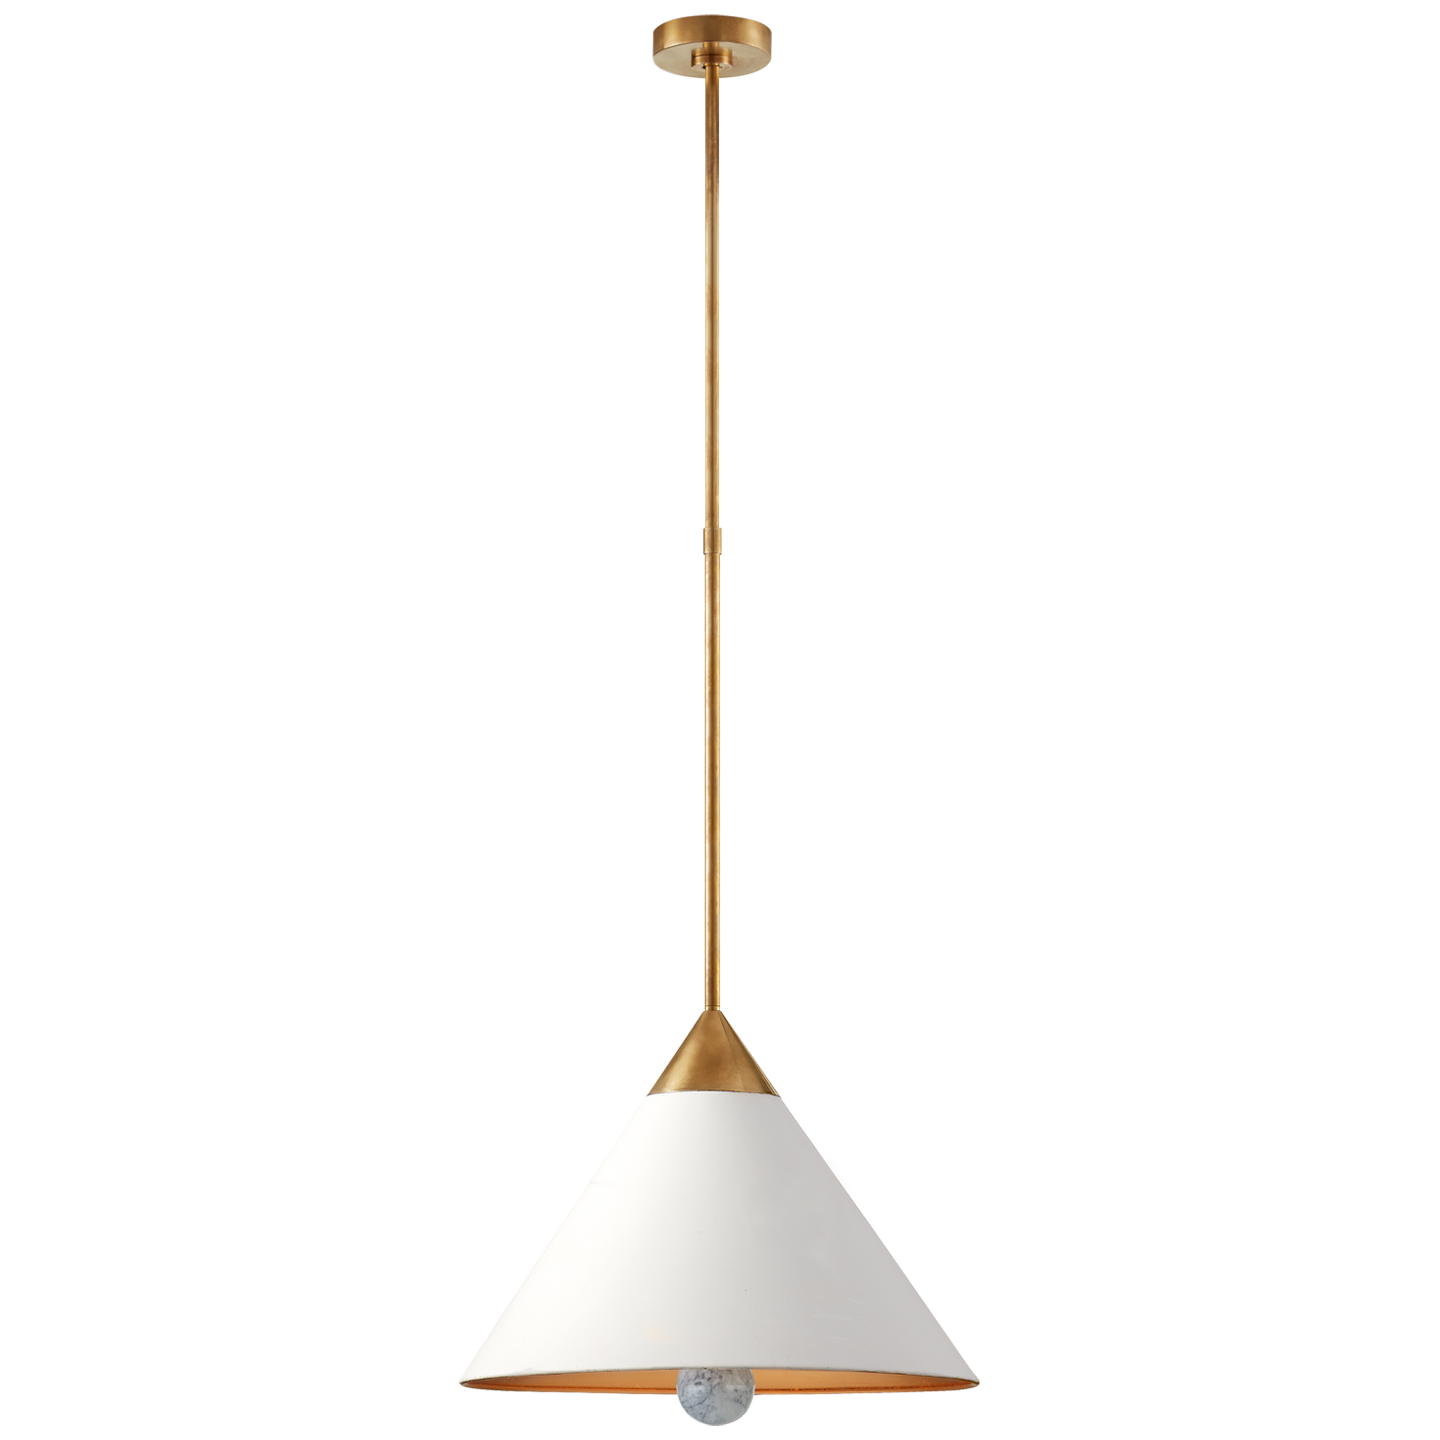 Lataa kuva Galleria-katseluun, Cleo Pendant in Antique-Burnished Brass and Antique White with Frosted Acrylic
